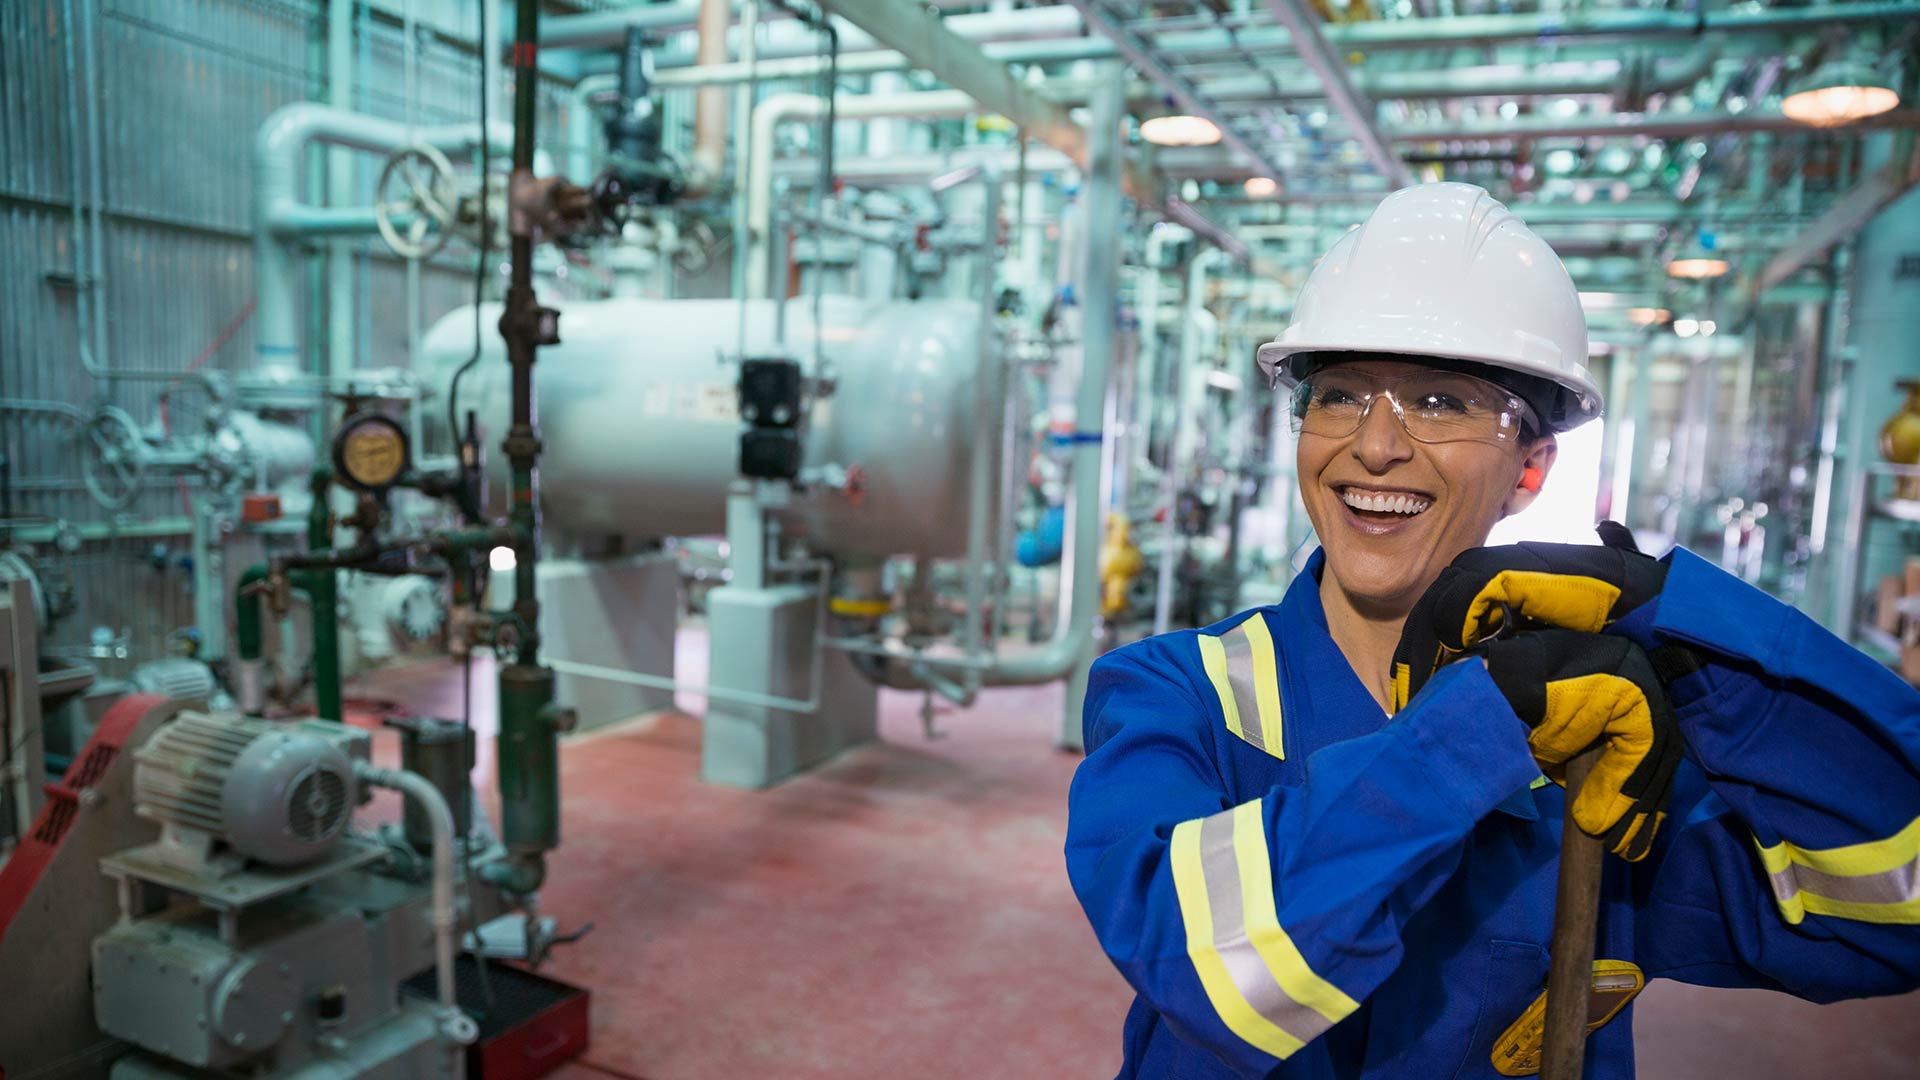 Female worker smiling in gas plant